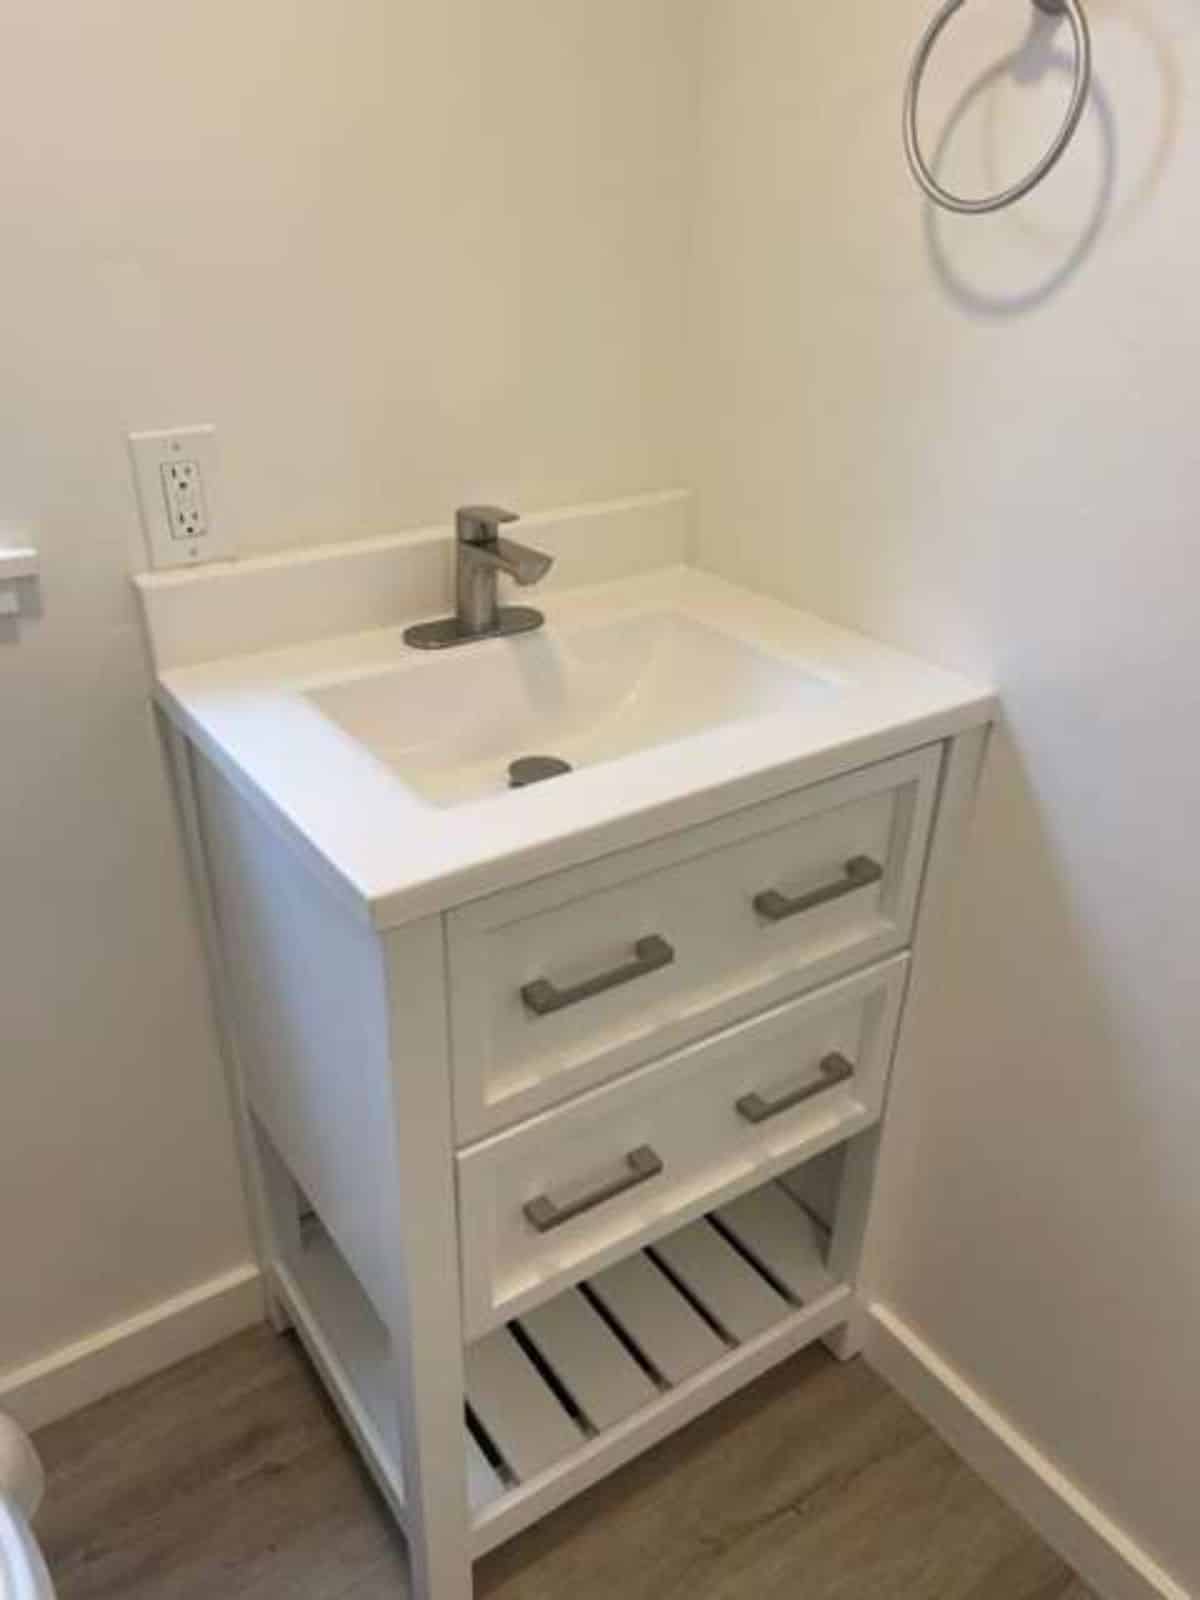 sink with vanity and other storage cabinets in bathroom of tiny home with a loft